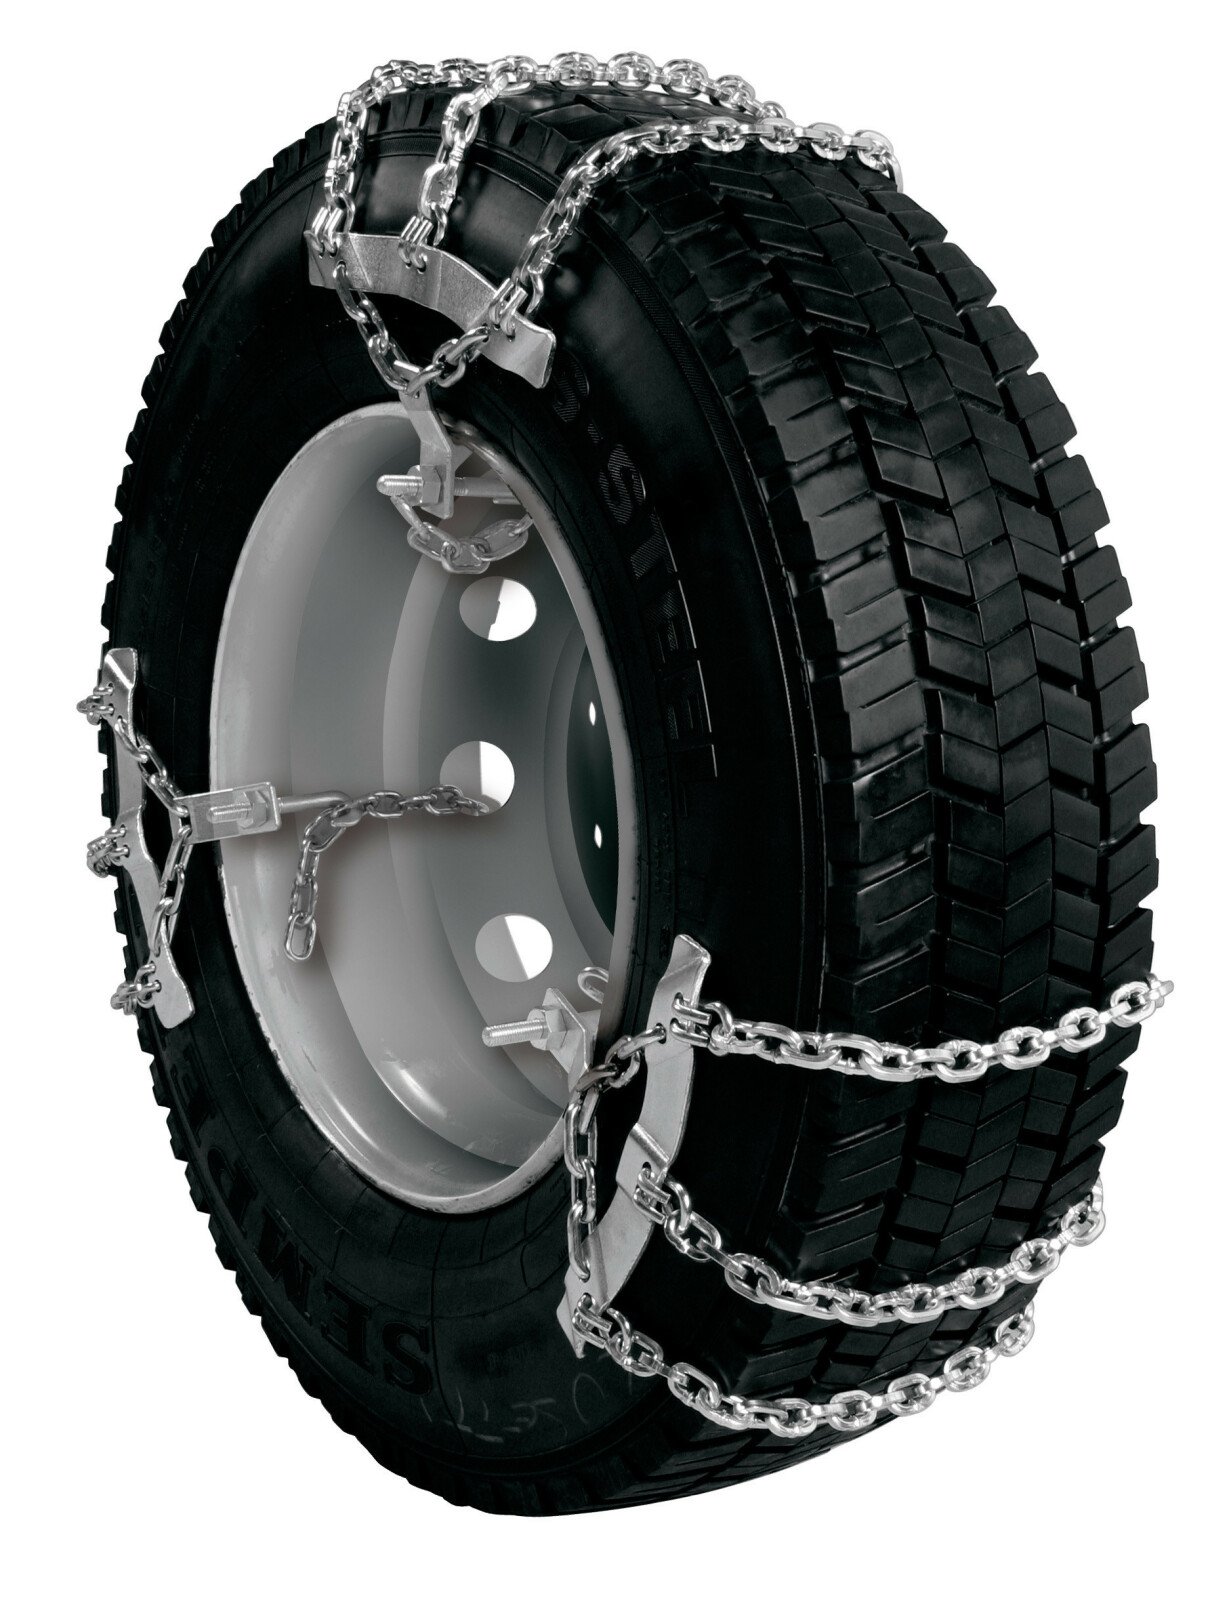 Track sector chains for trucks - L-3 thumb